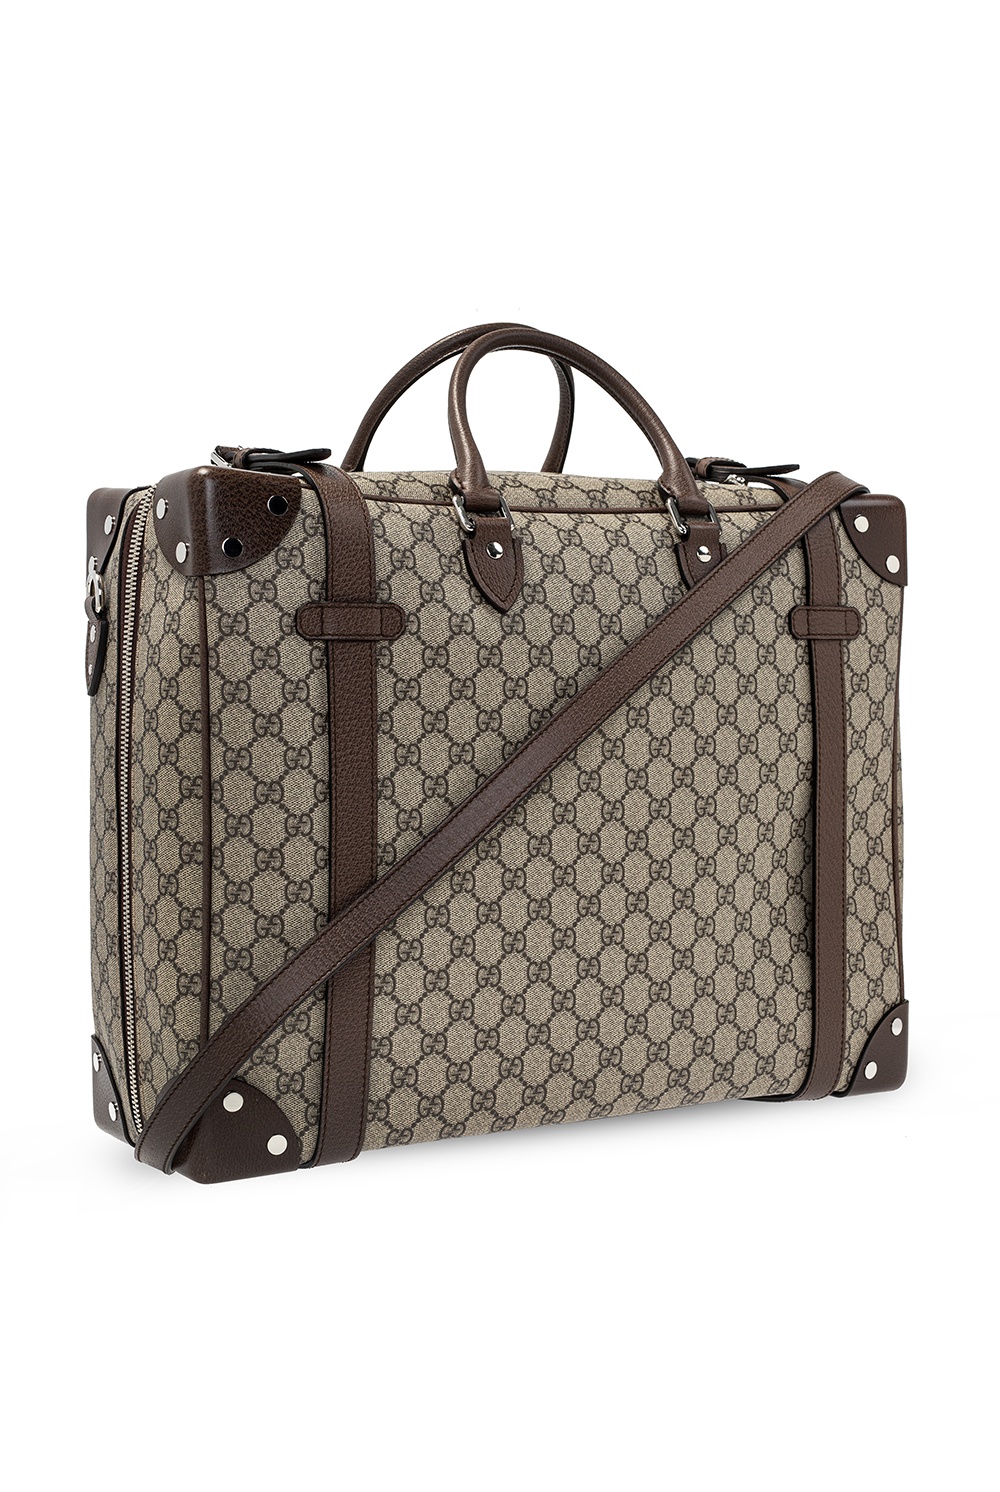 Gucci Holdall bag with logo